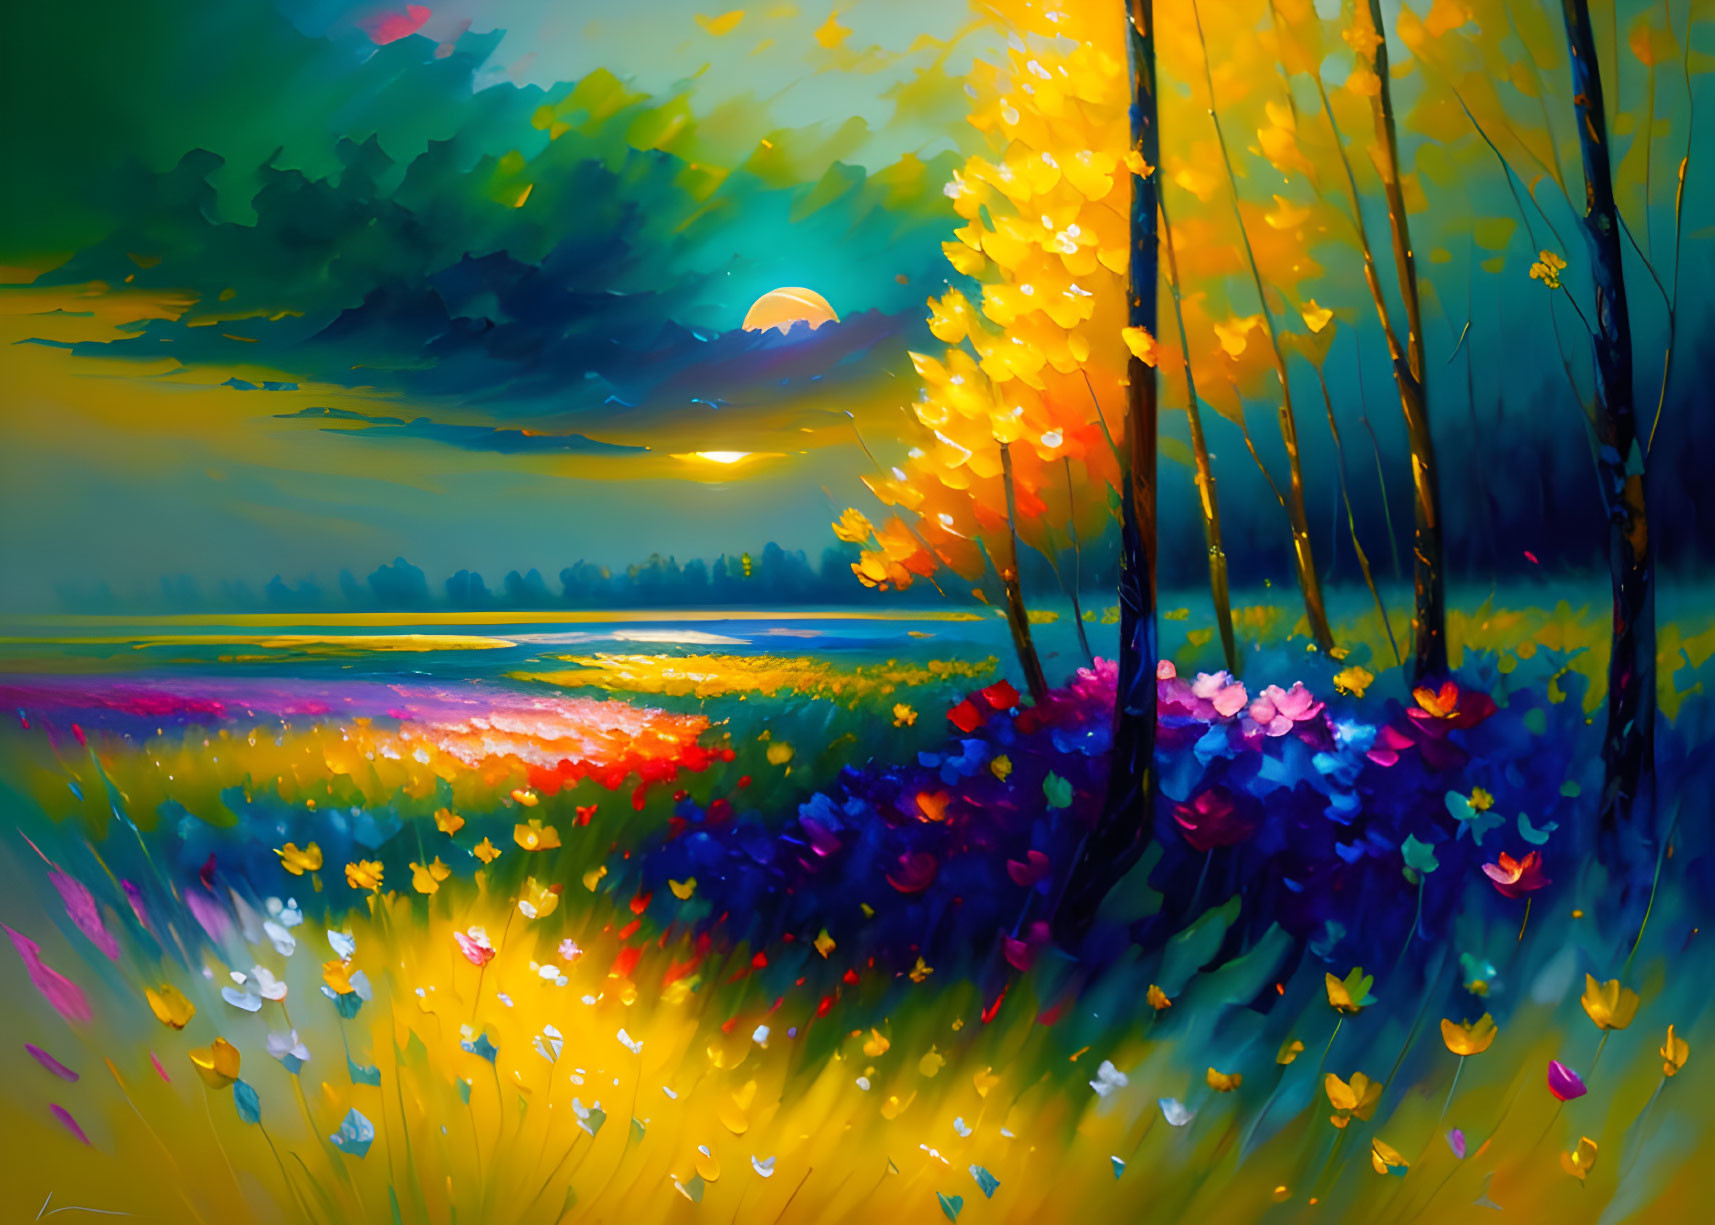 Colorful landscape painting: sunset over wildflower meadow, expressive sky, tree silhouettes